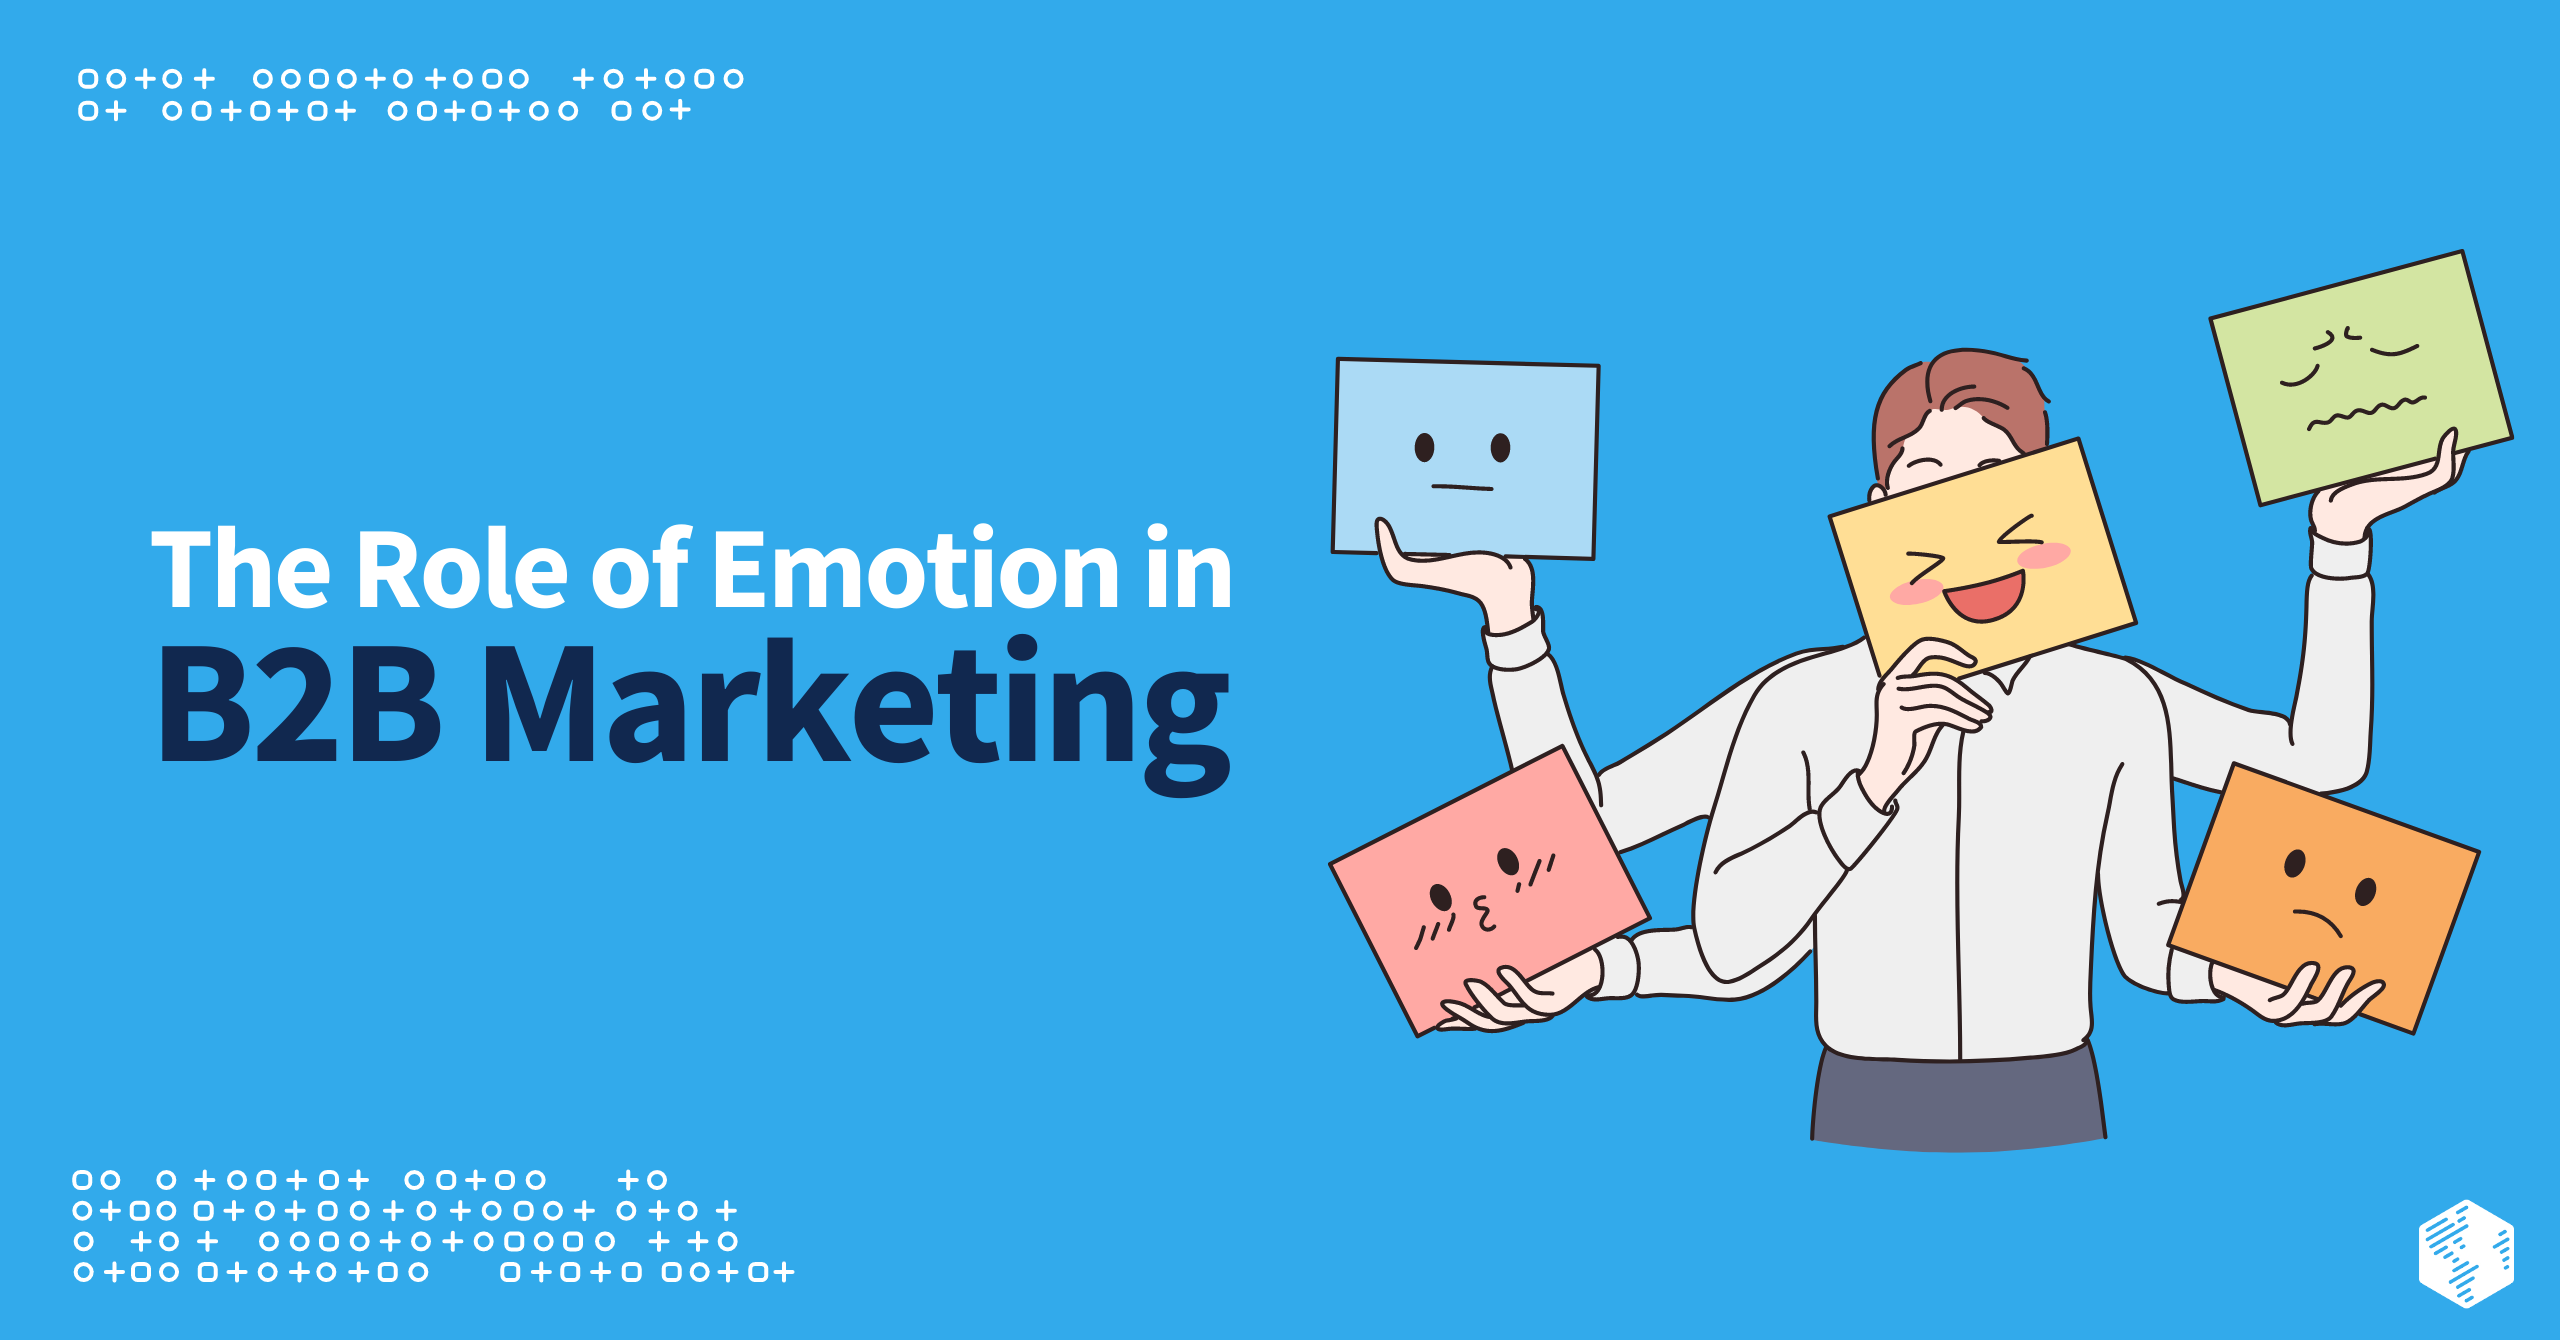 The Role of Emotion in B2B Marketing